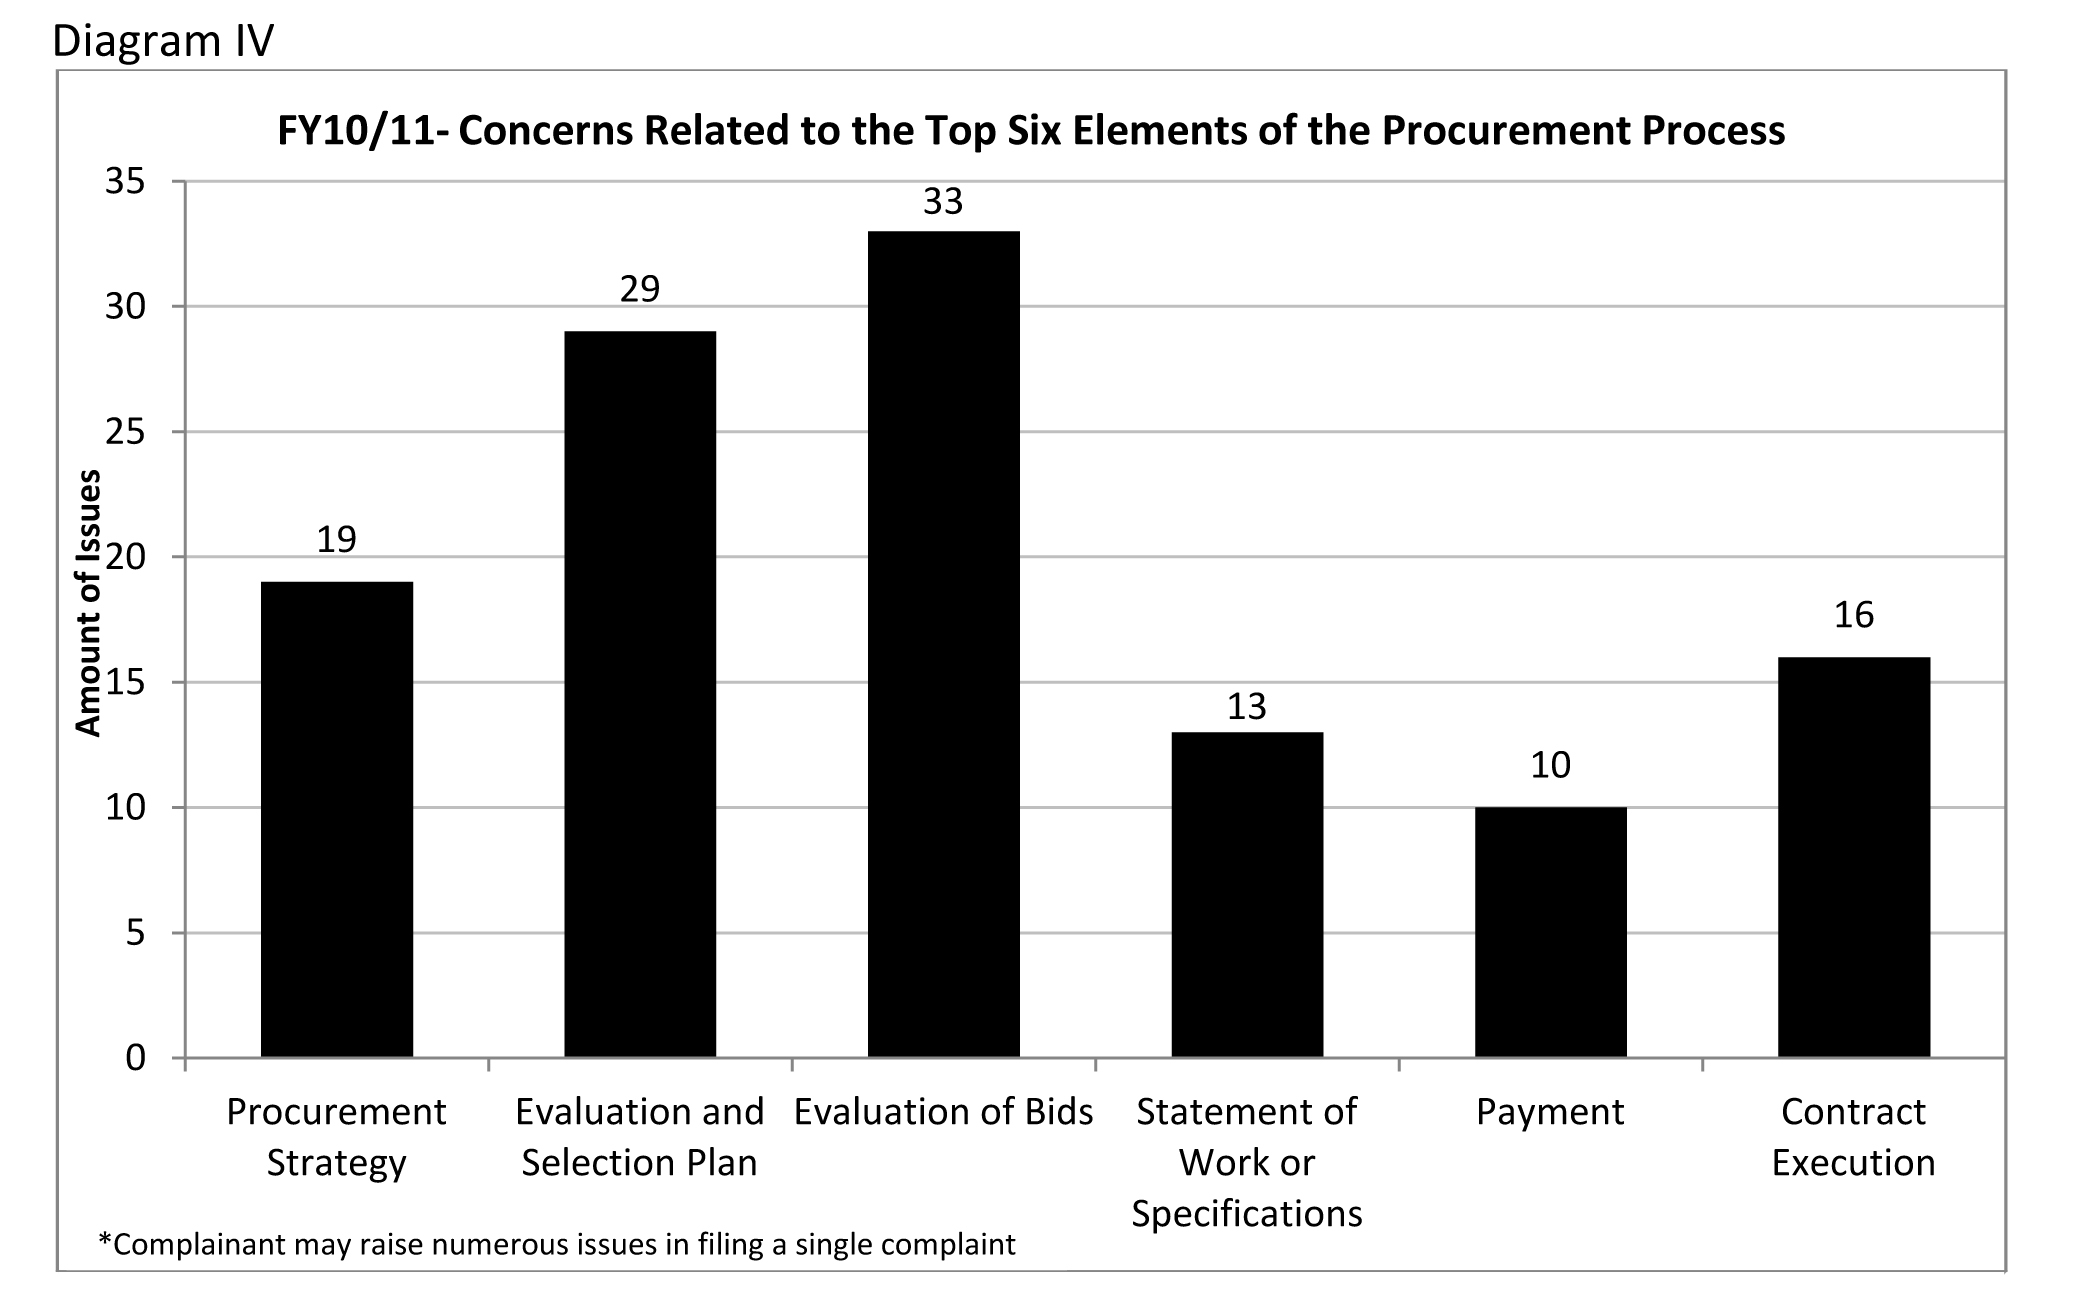 Diagram IV - Concerns Related to the Top Six Elements of the Procurement Process